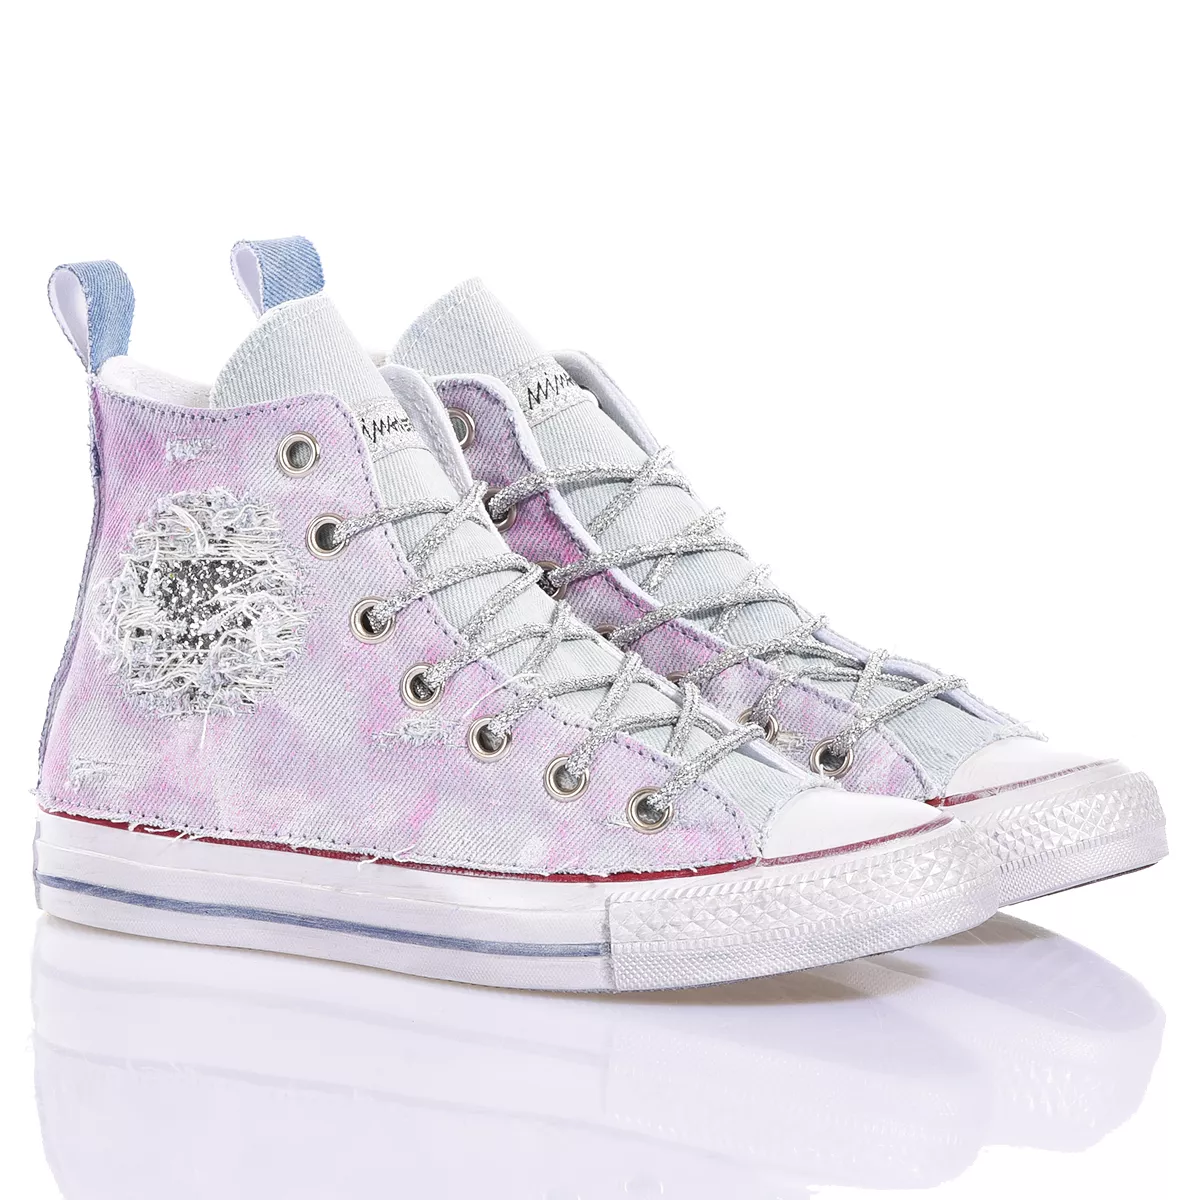 Converse Denim Glitter High Top Washed-out, brokat, Special